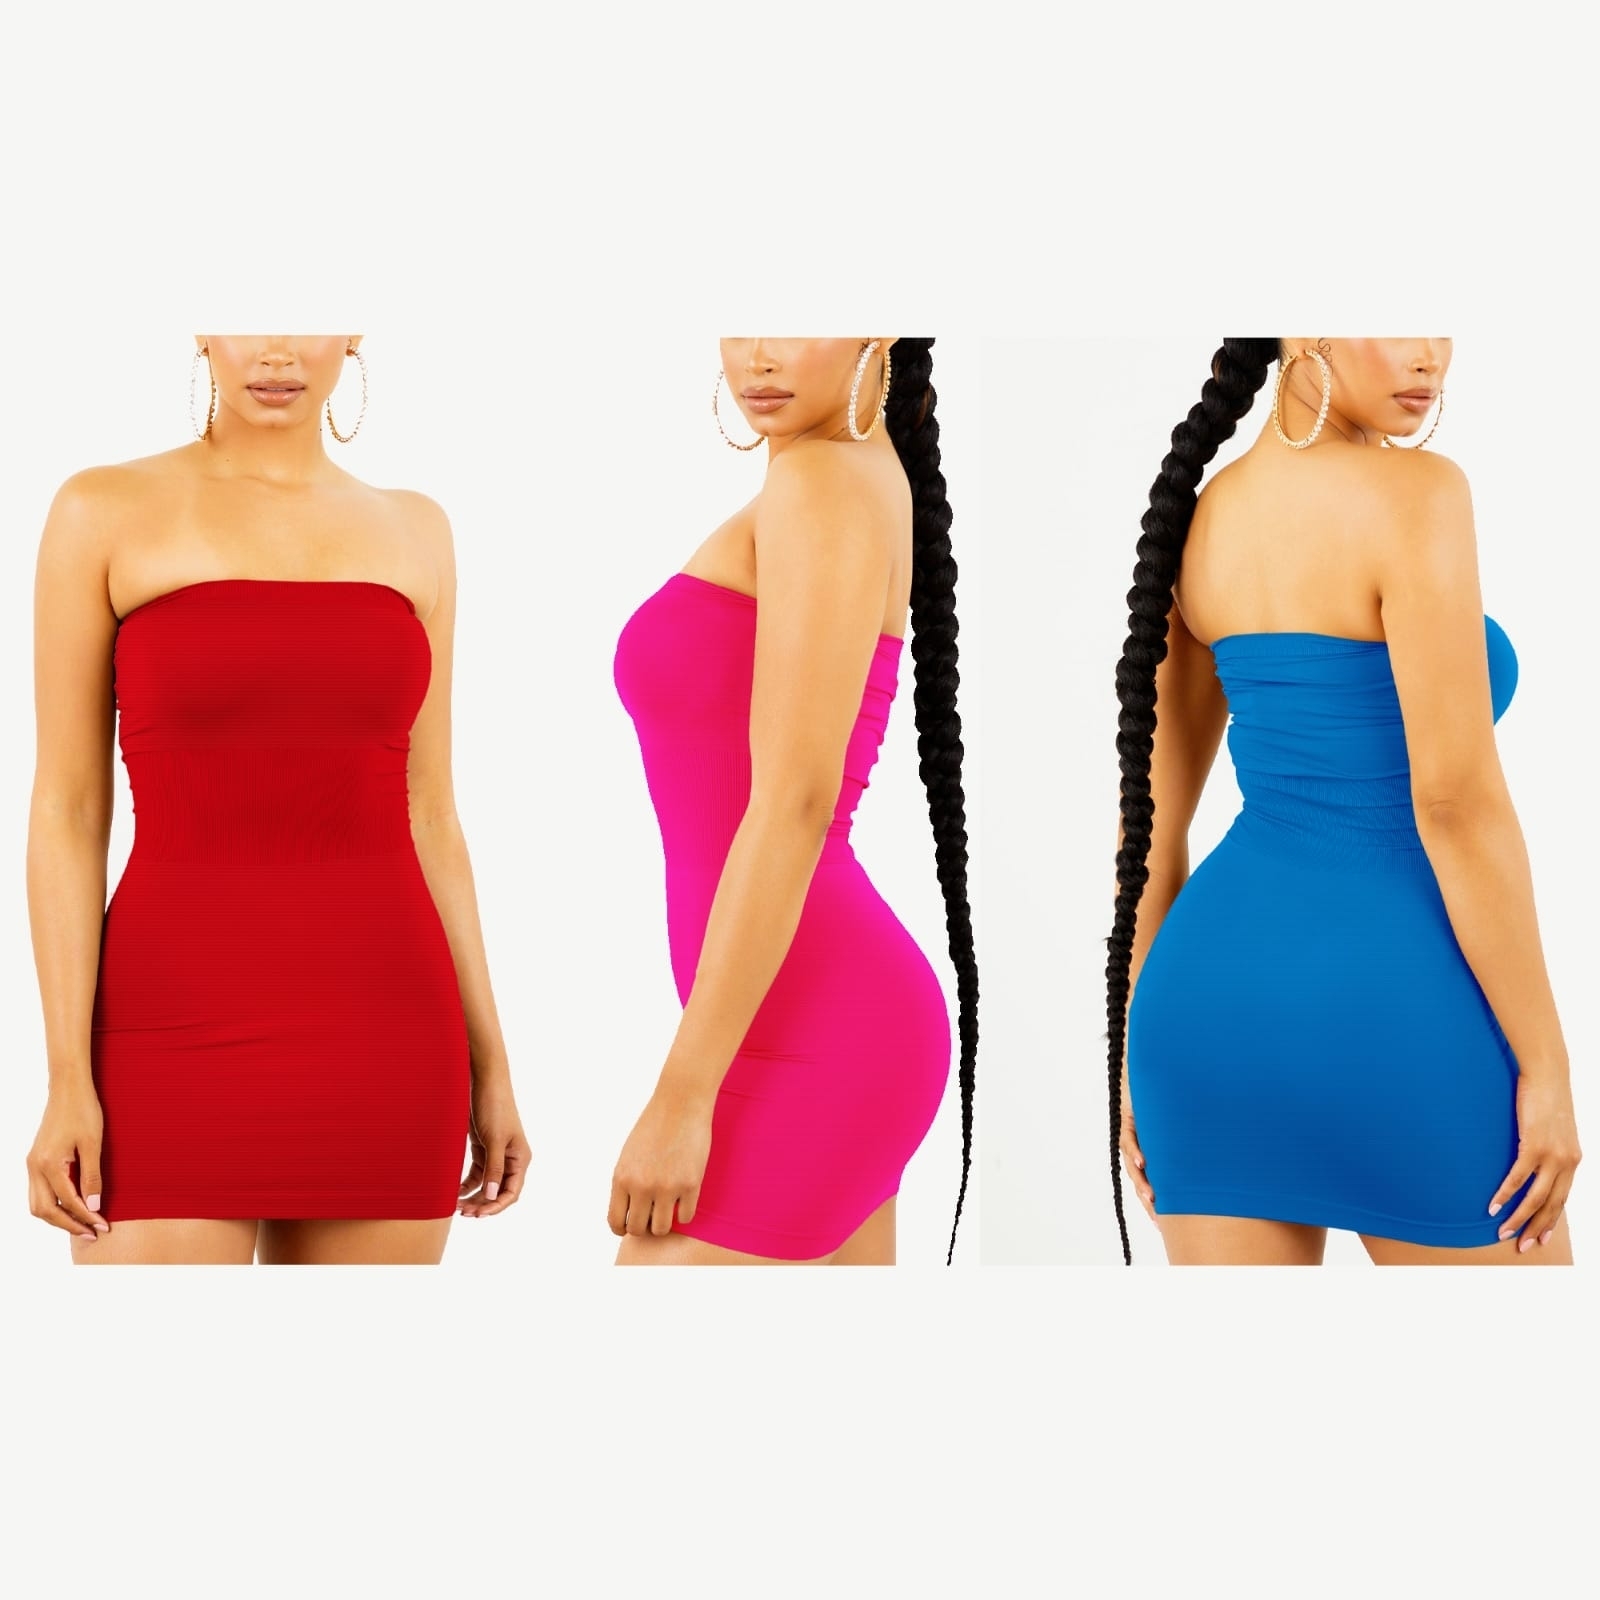 3-Pack Women's Strapless Stretchy Seamless Tight Fit Body Con Mini Tube Top Dress - PINK, XL